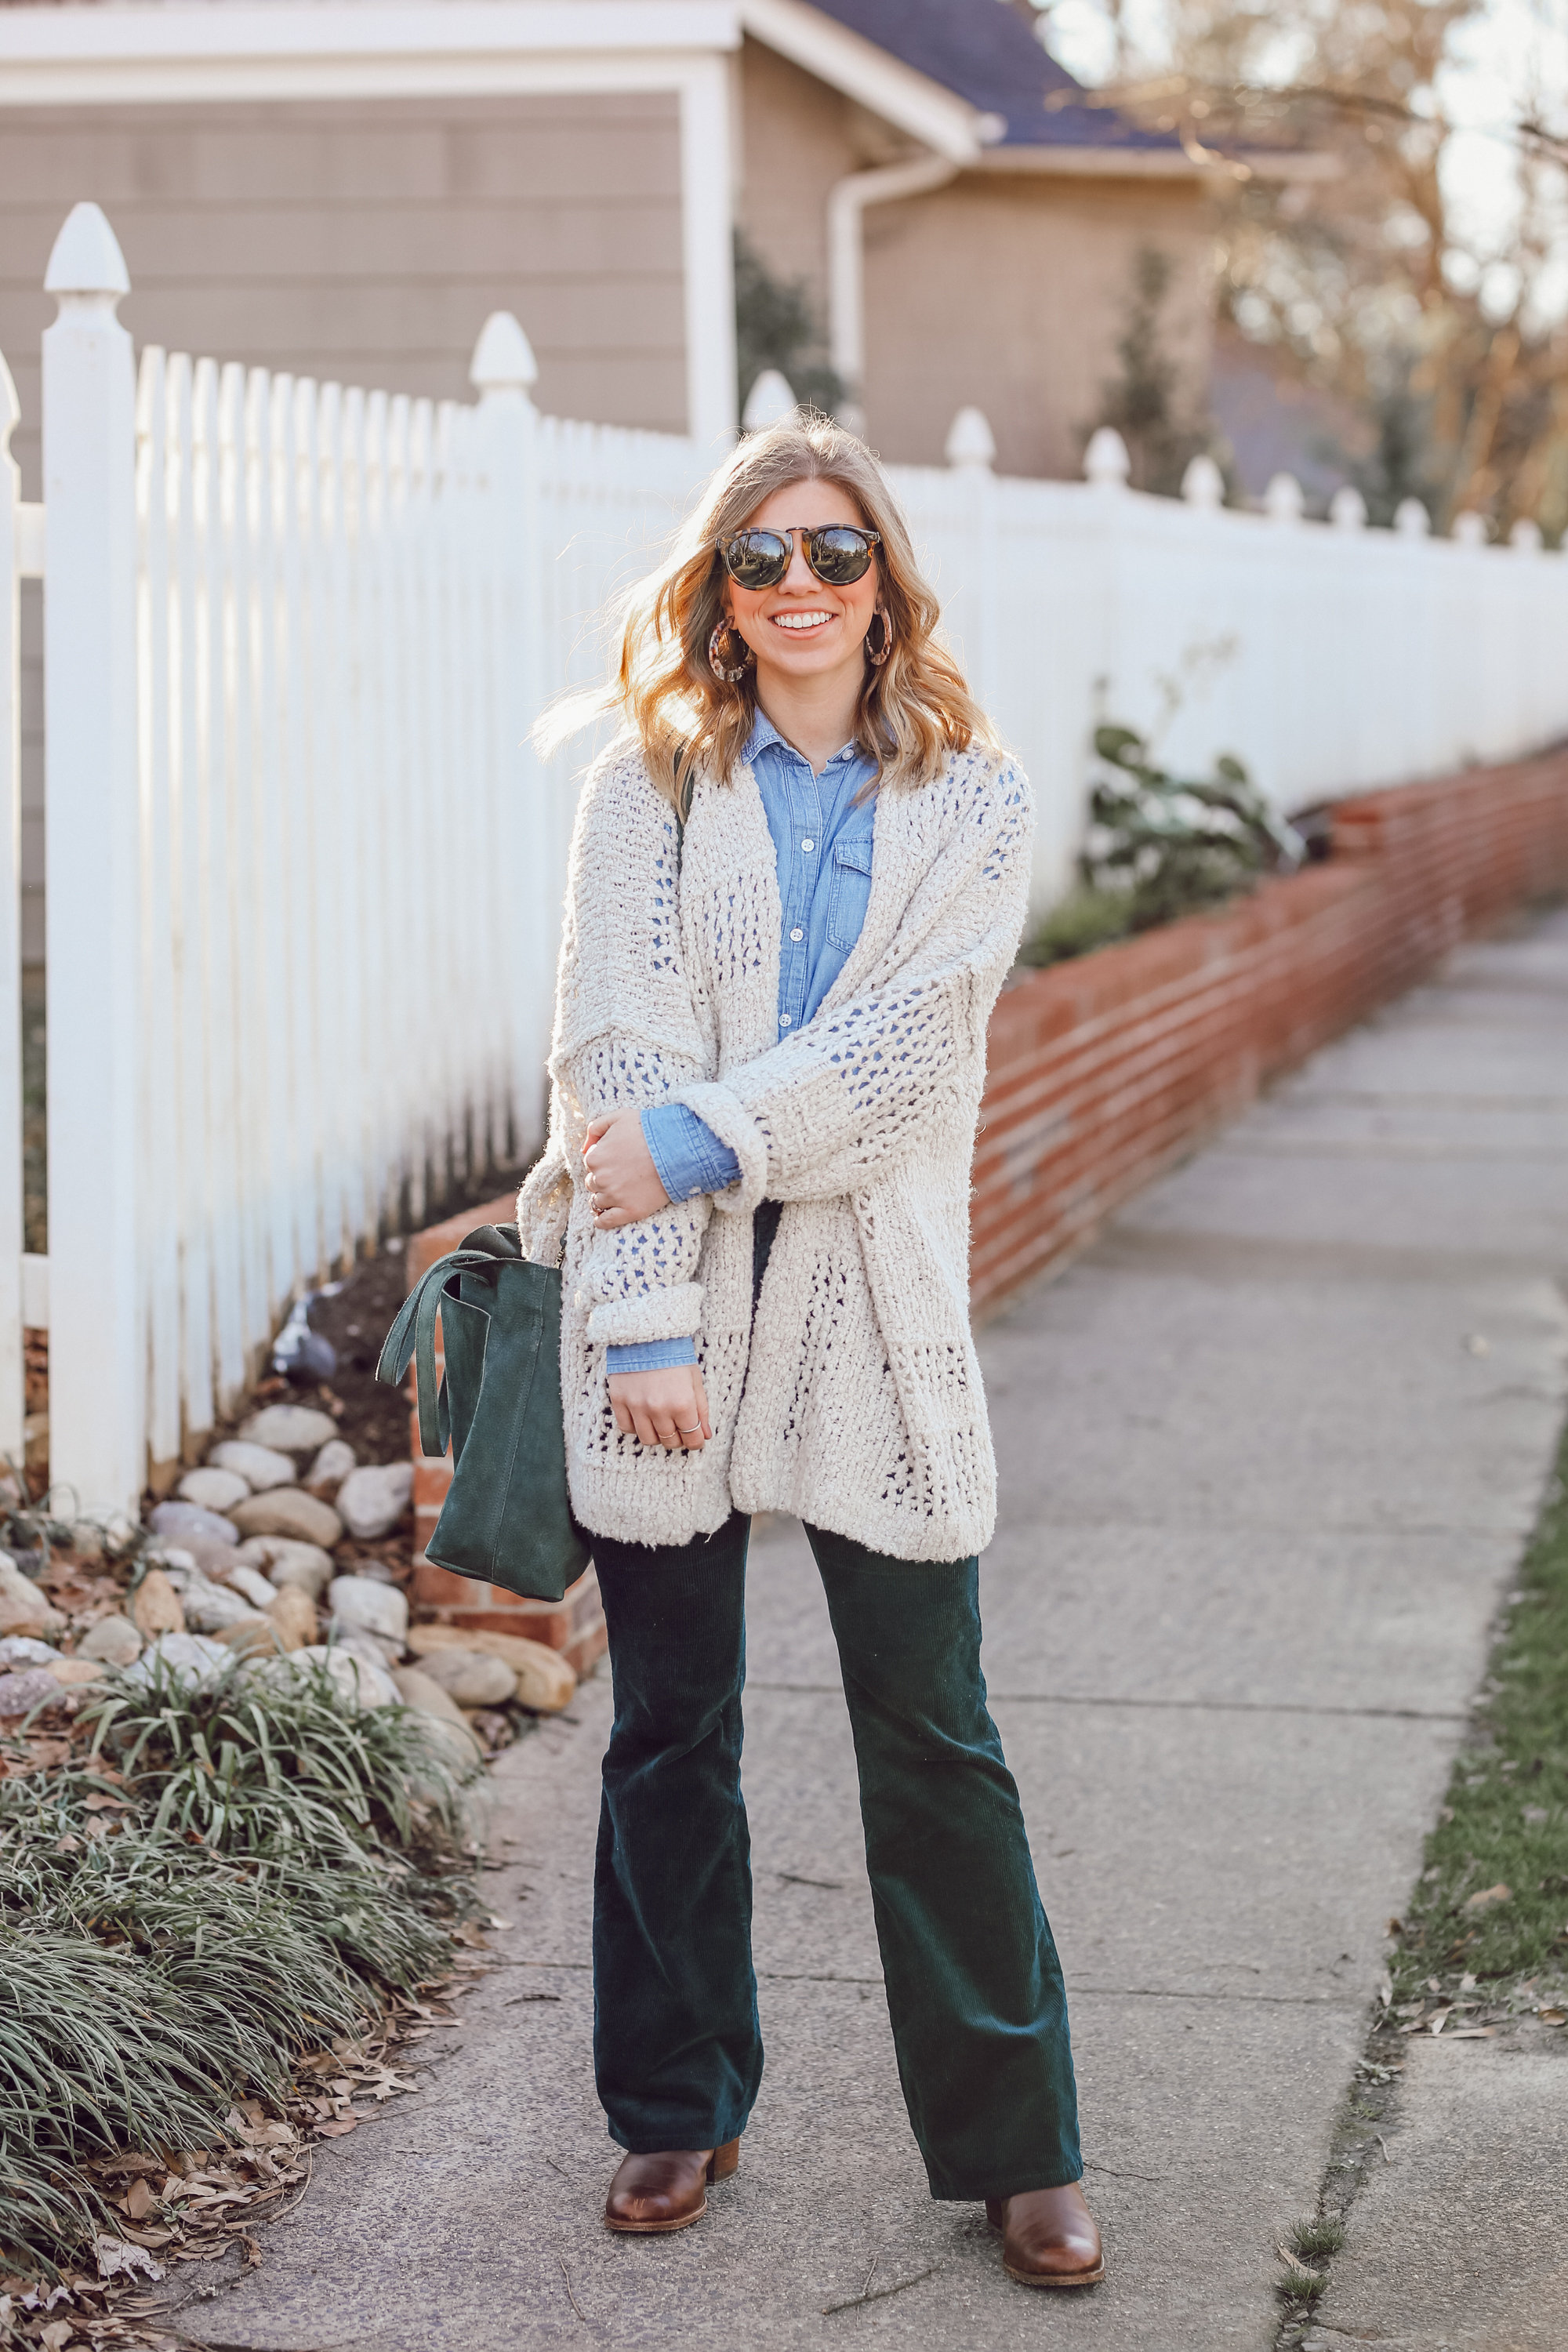 How to Pull off the 70s Trend in 2019 | Flared Corduroys, Crochet Sweater | Louella Reese